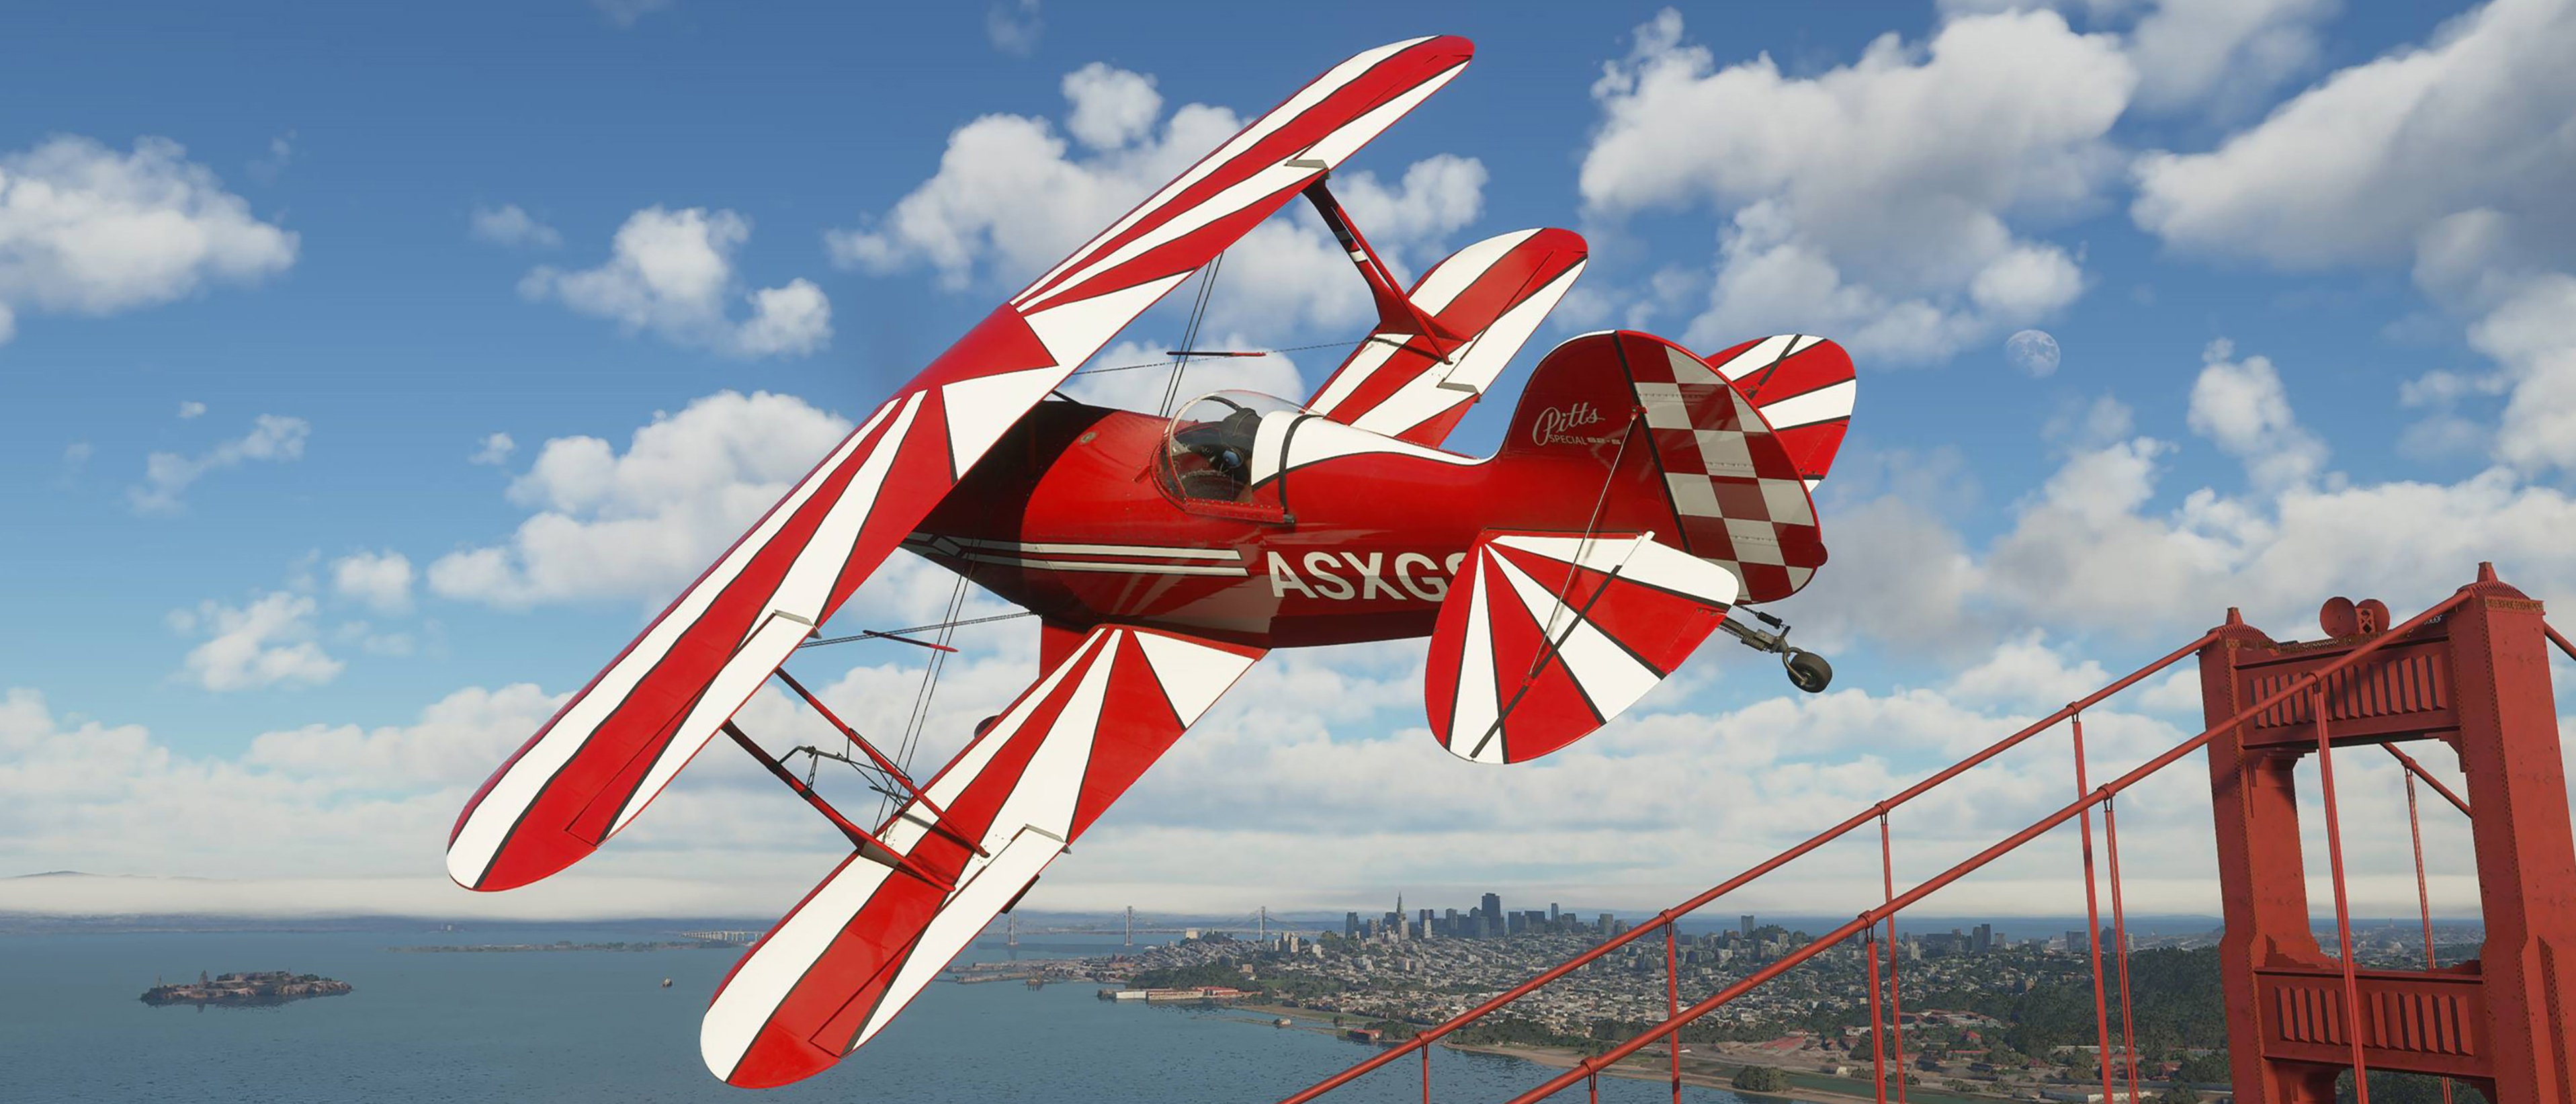 Microsoft Flight Simulator 2020 gets minimum, recommended and ideal PC  specs